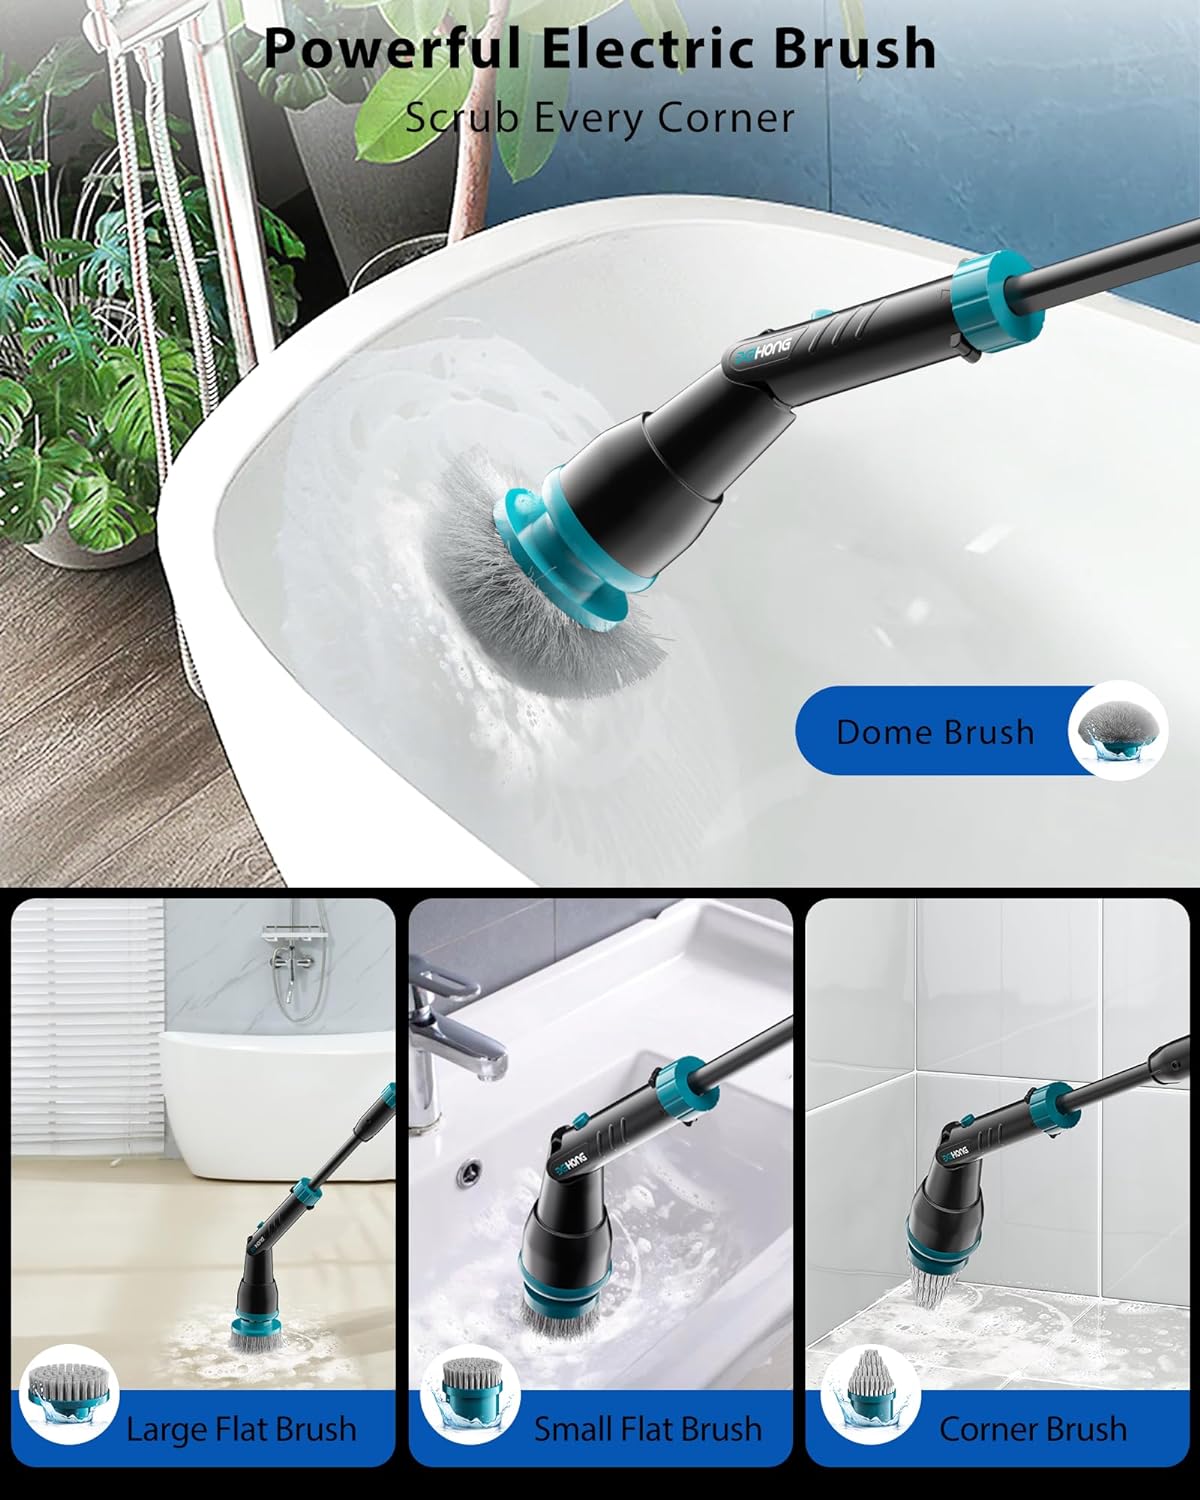 BEI & HONG Electric Spin Scrubber,1000RPM Cordless Shower Scrubber, 2.5H Power Scrubber with Adjustable Extension Arm, 4 Replaceable Cleaning Heads, Electric Scrubber for Cleaning Bathroom & Tub